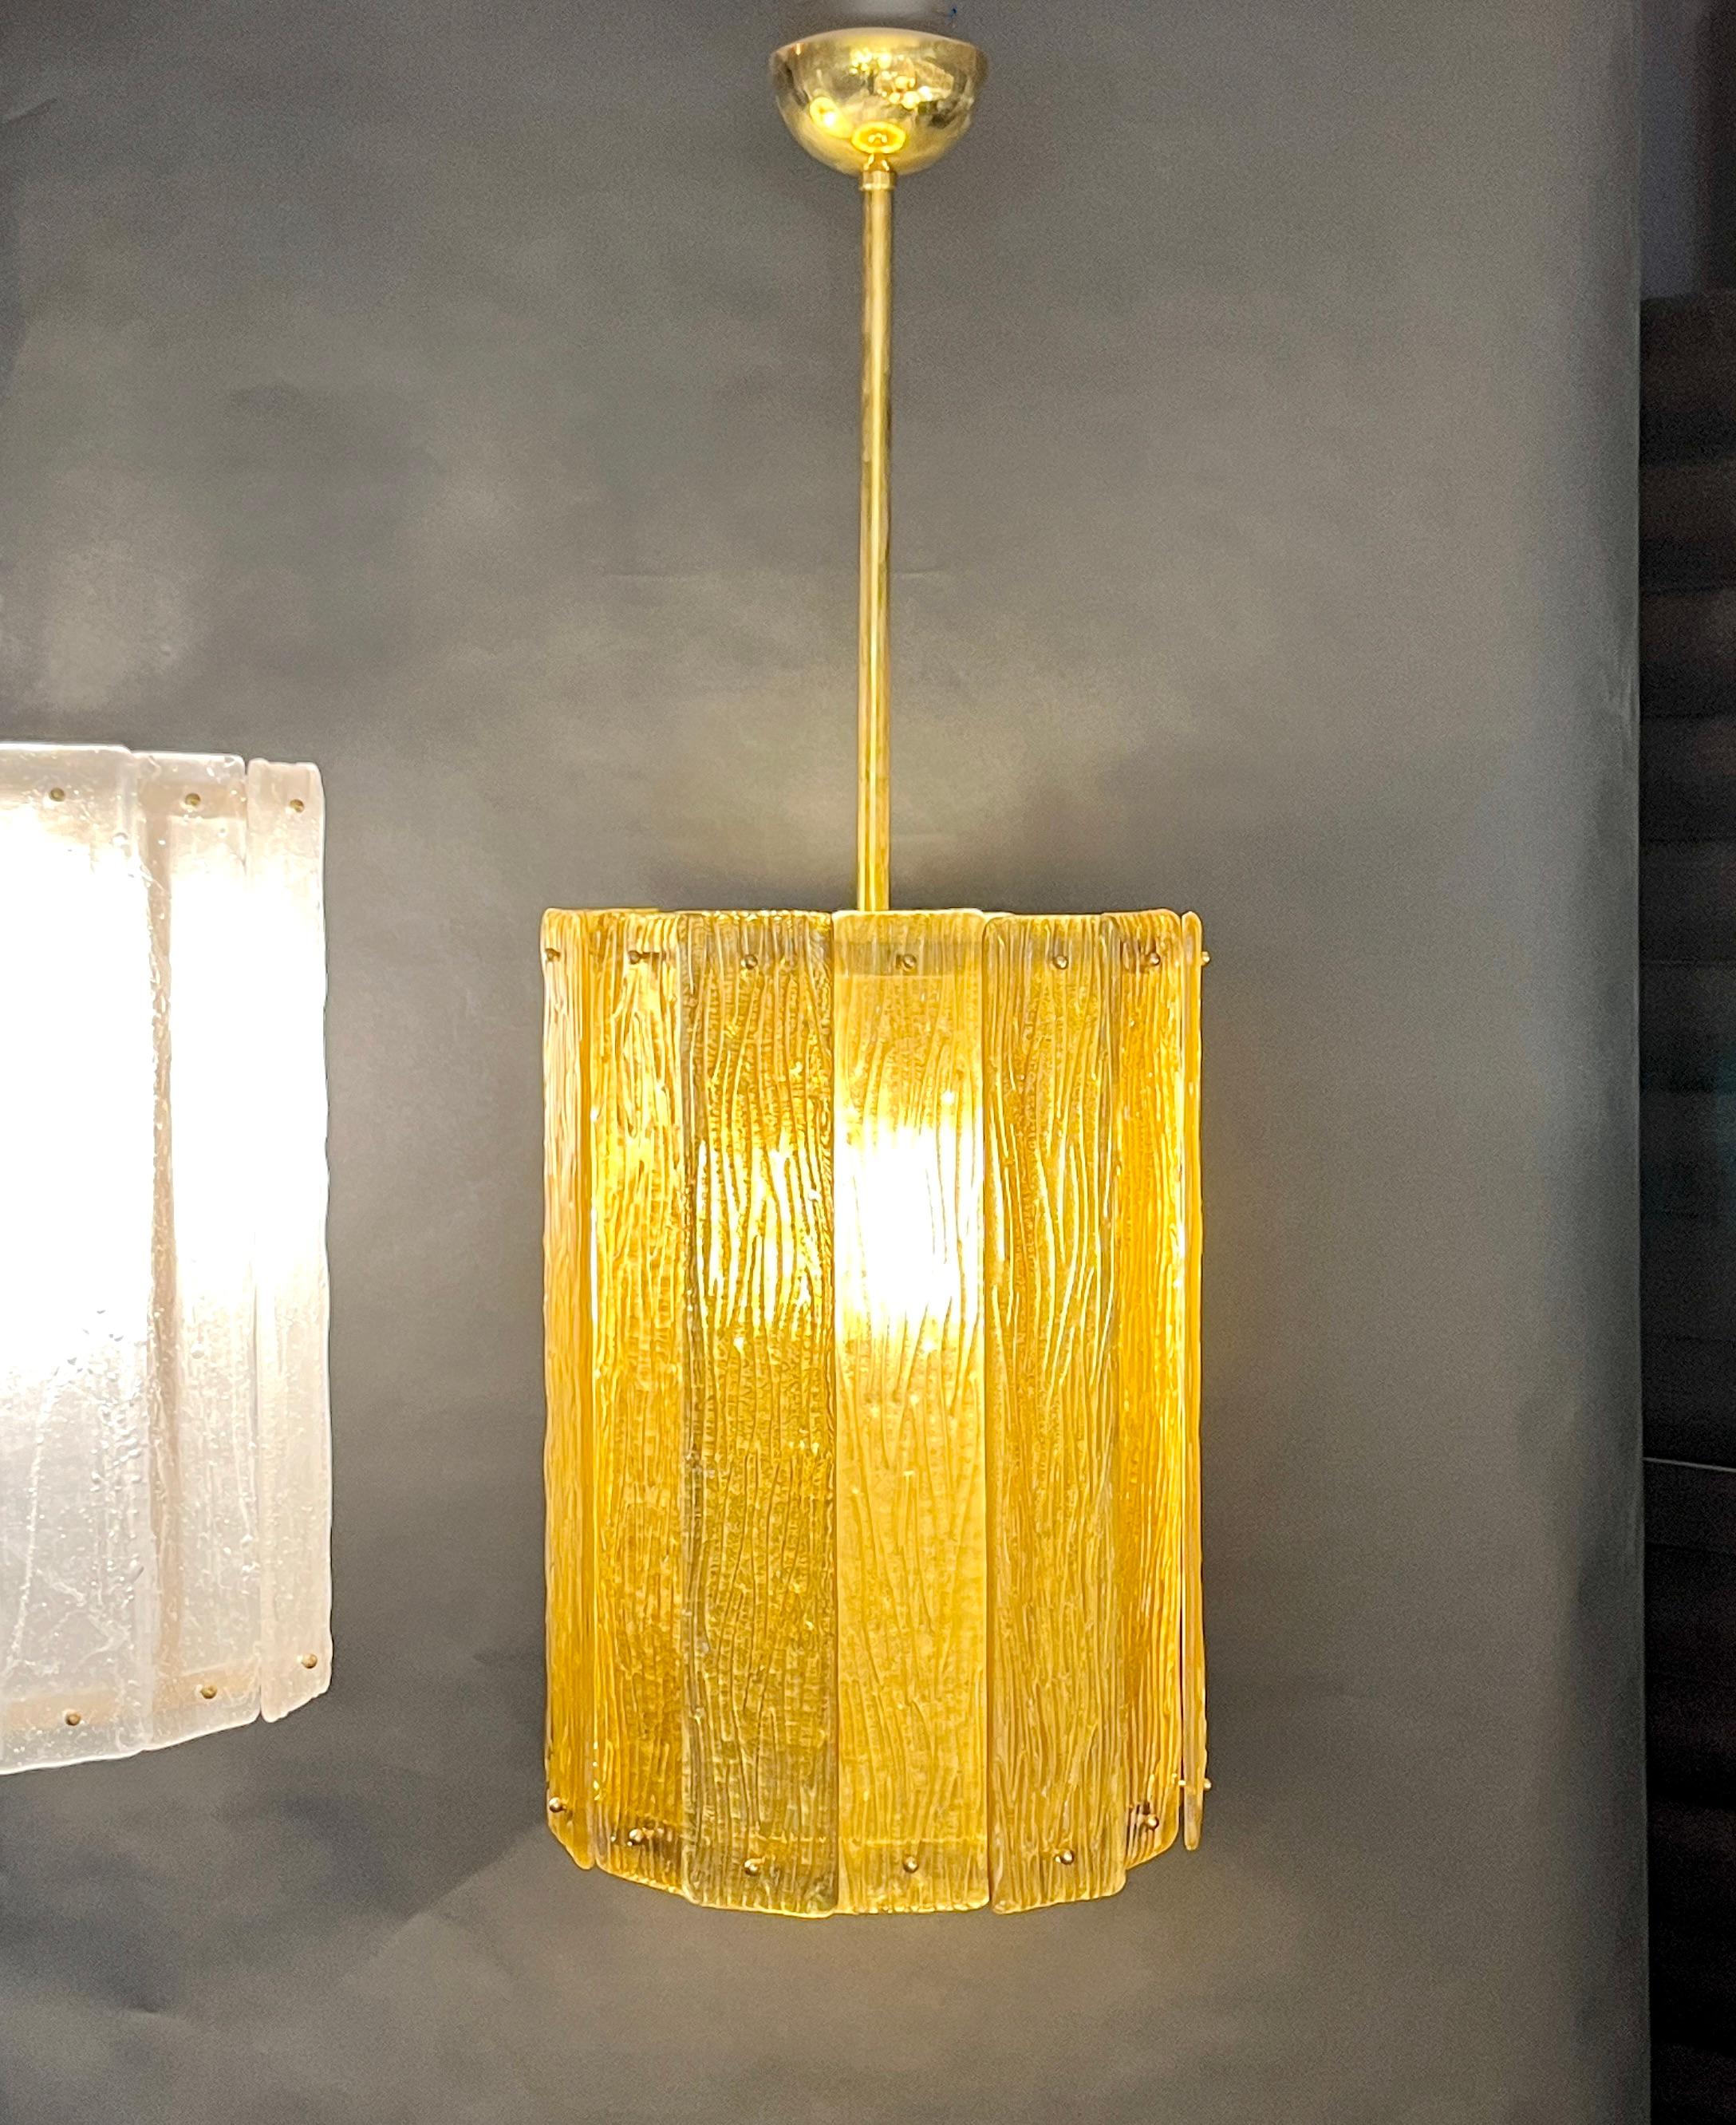 Unique contemporary Italian Art Deco design round pendant chandelier, entirely handcrafted. This light fixture is composed of a handmade brass structure supporting gold textured overlapping Murano glass bands, the amber glass decorated on reverse